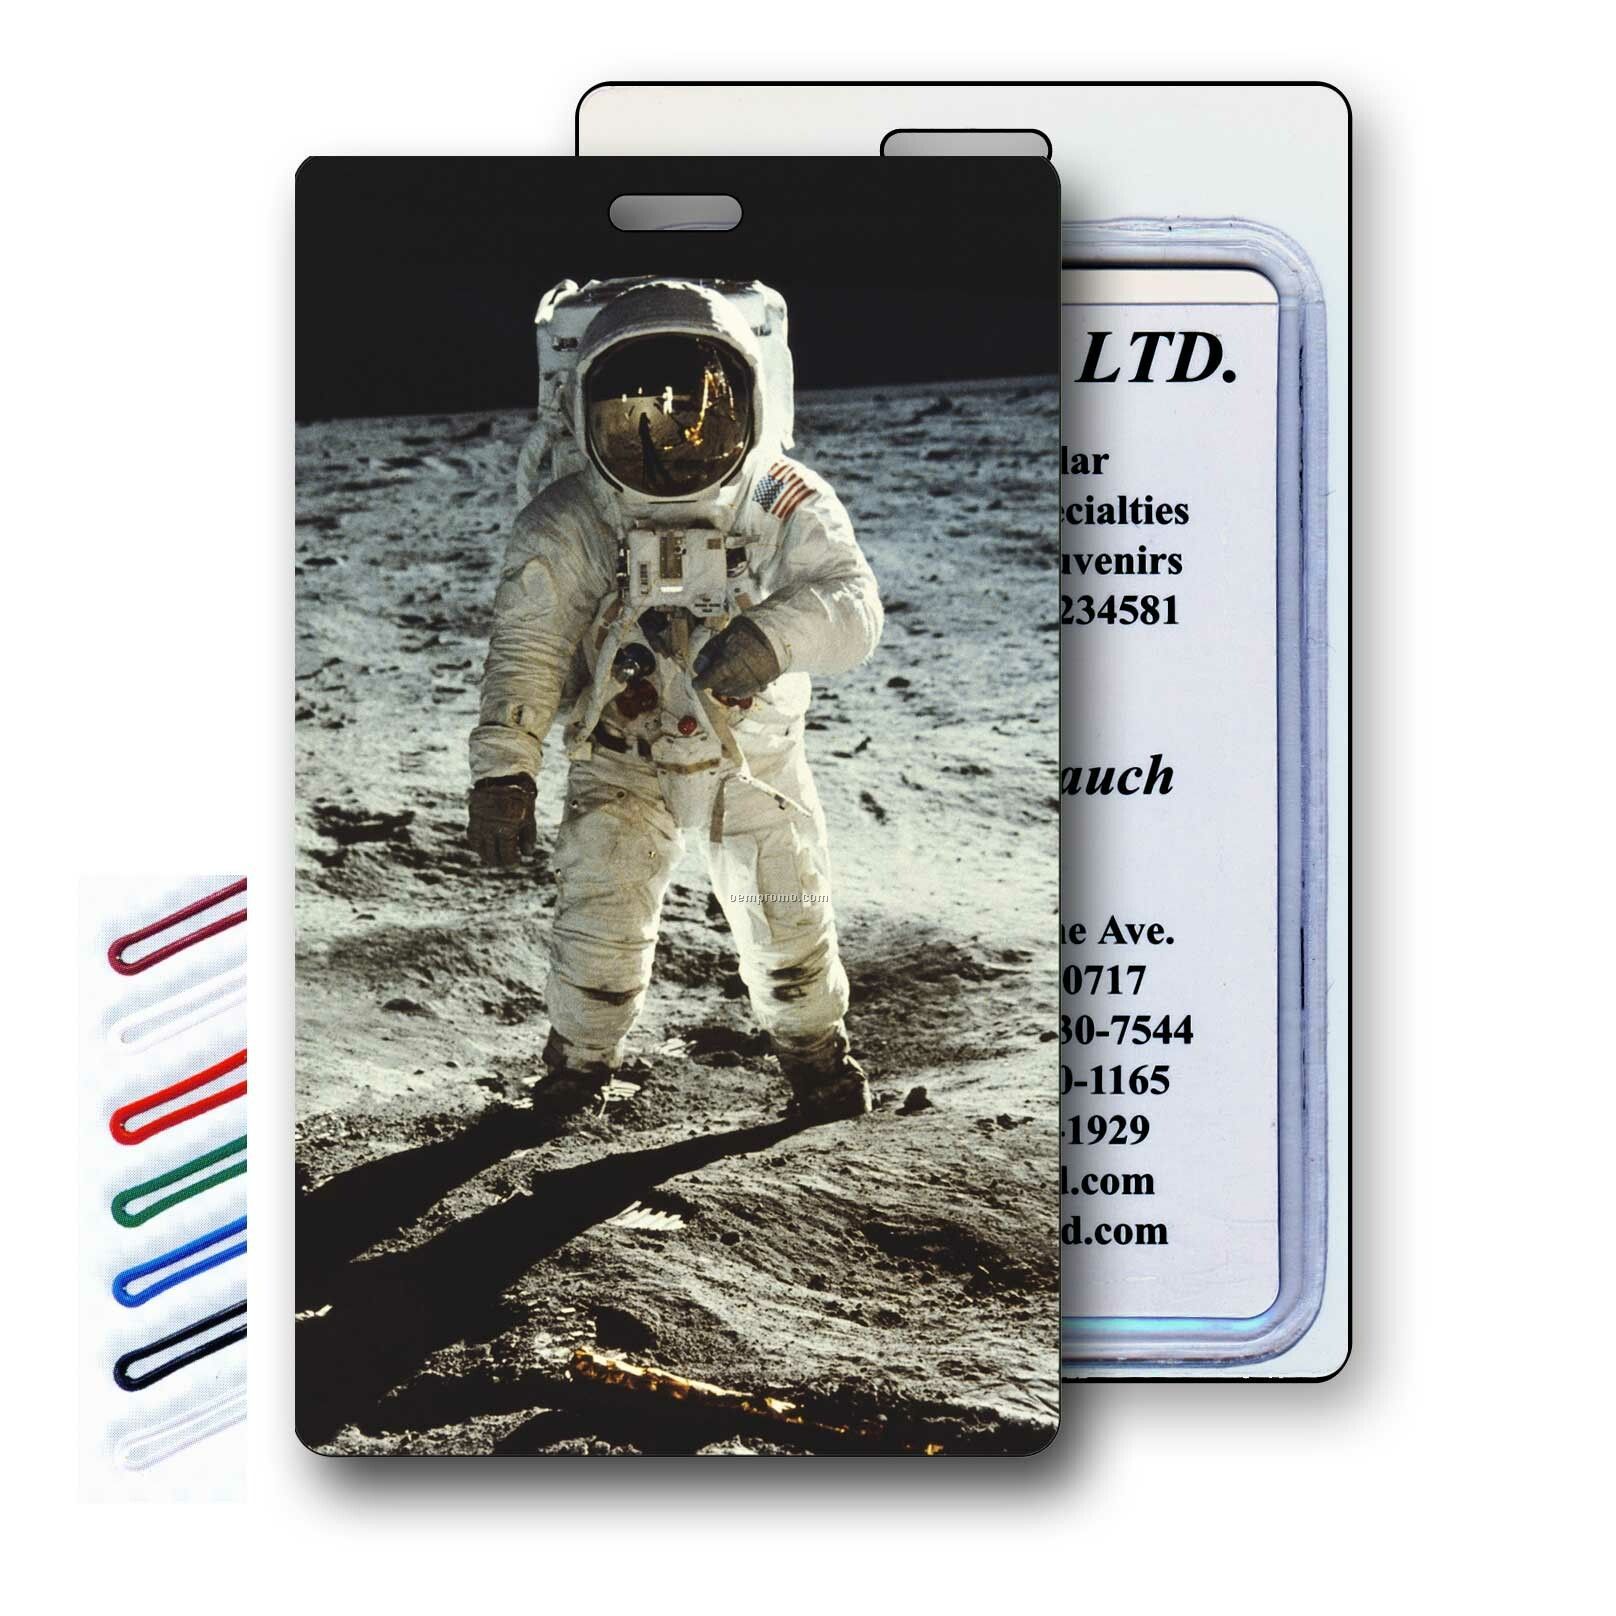 Luggage Tag 3d Lenticular 3d Astronaut, Moon, Space, Image (Blank )